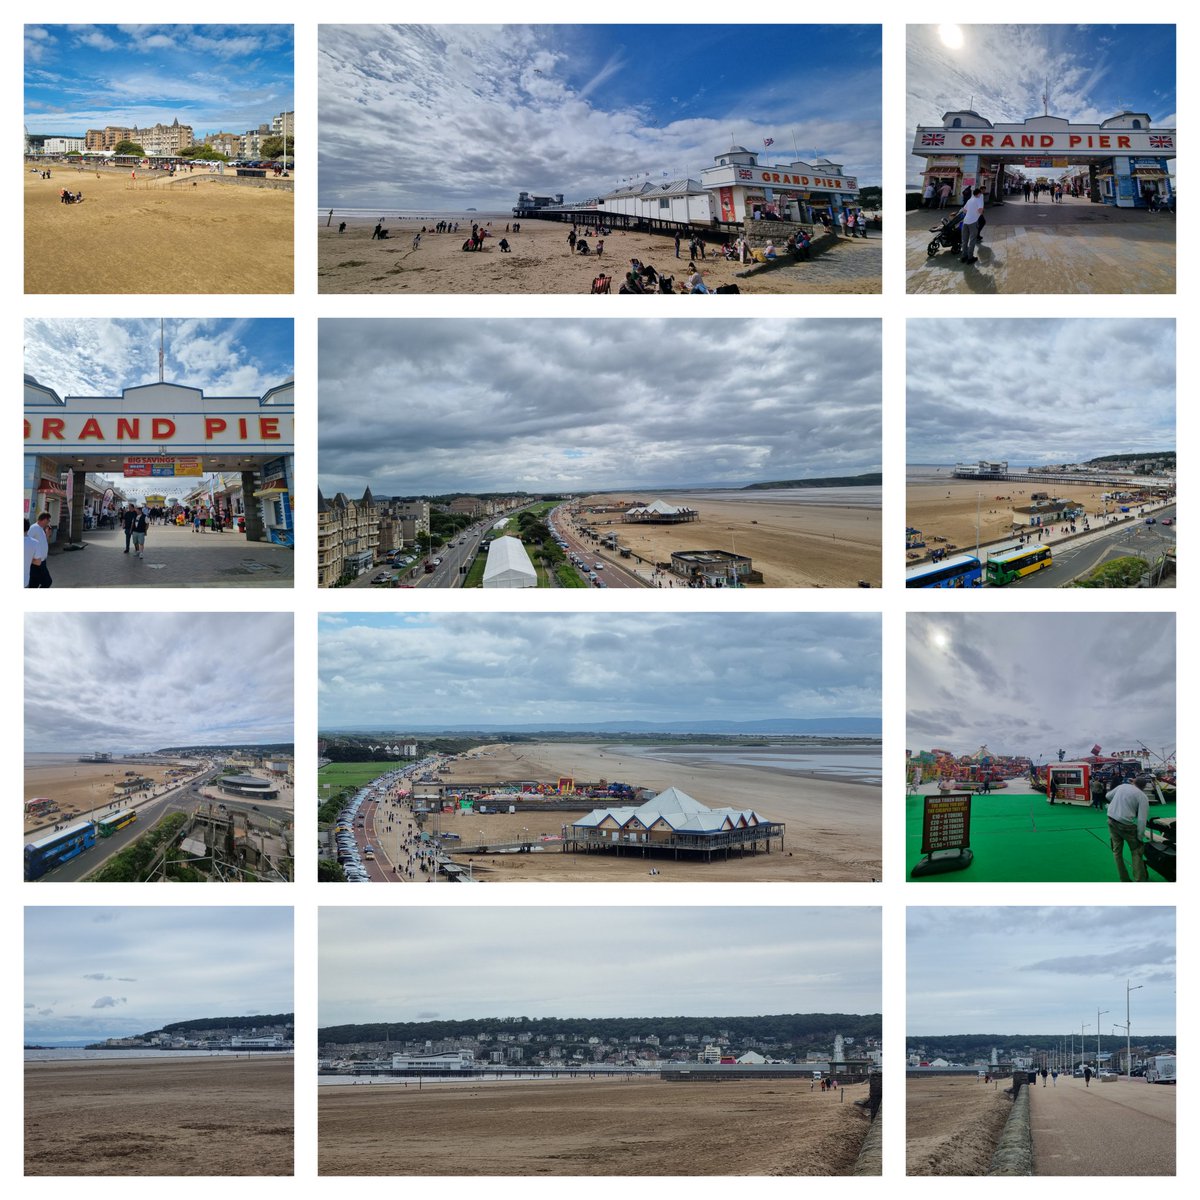 Day trip to Weston-super-Mare. Lunch at Revo, ride on the Sky View Wheel and a visit to Funland at the Tropicanna which didn't seem the same without See Monster.
#visitweston #WestonsuperMare #visitsomerset